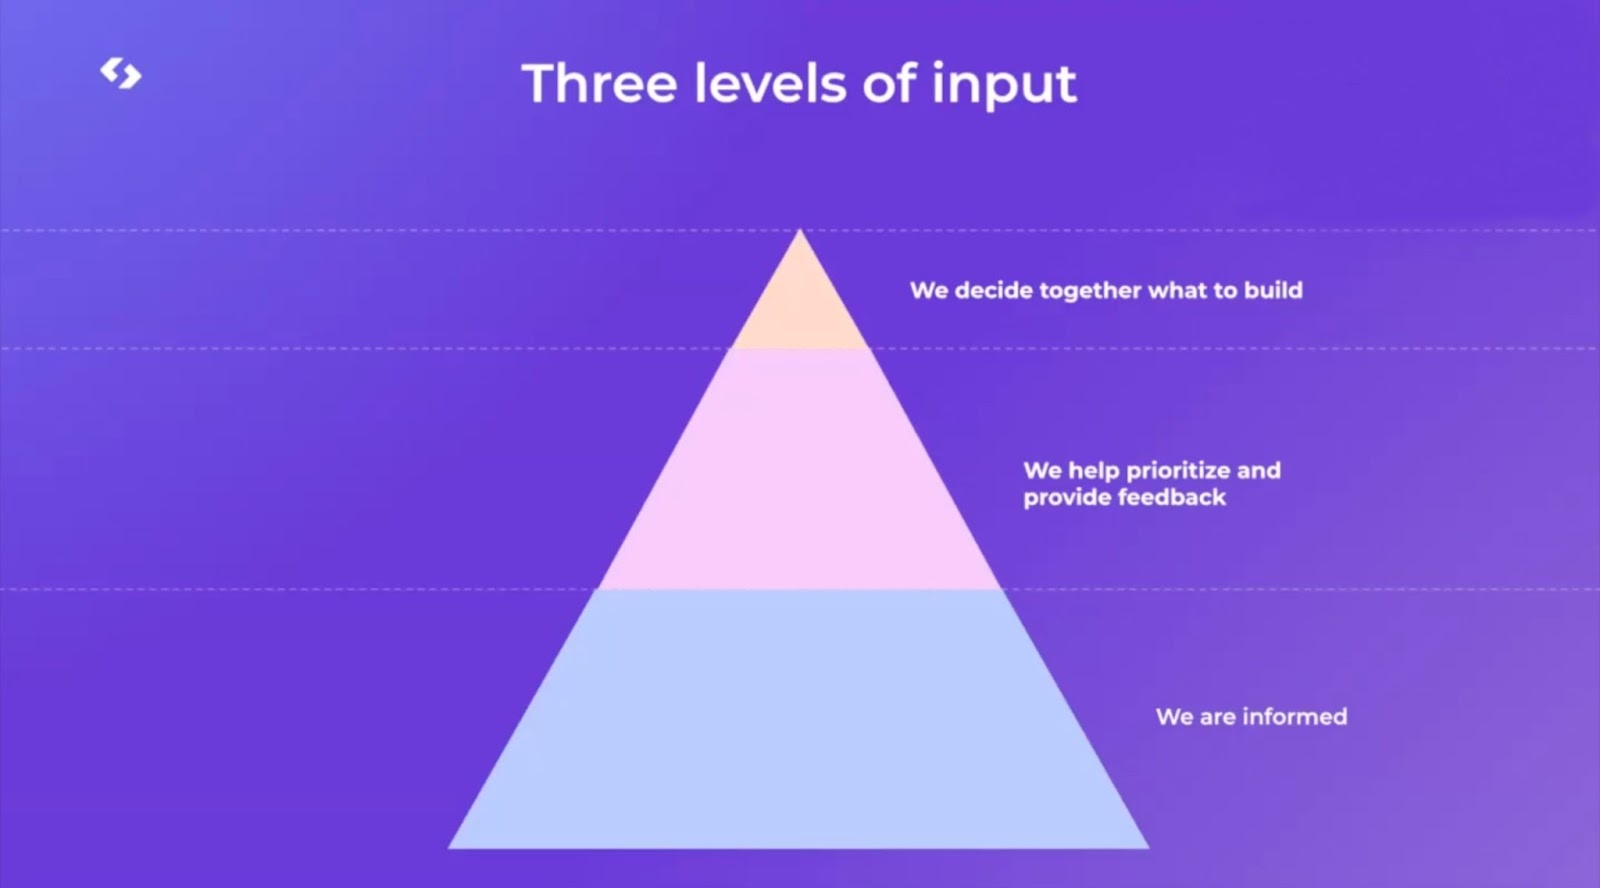 Pyramid showing the three levels of input. Top level: We decide together what to build. Mid level: We help prioritize and provide feedback. Bottom level: We are informed.